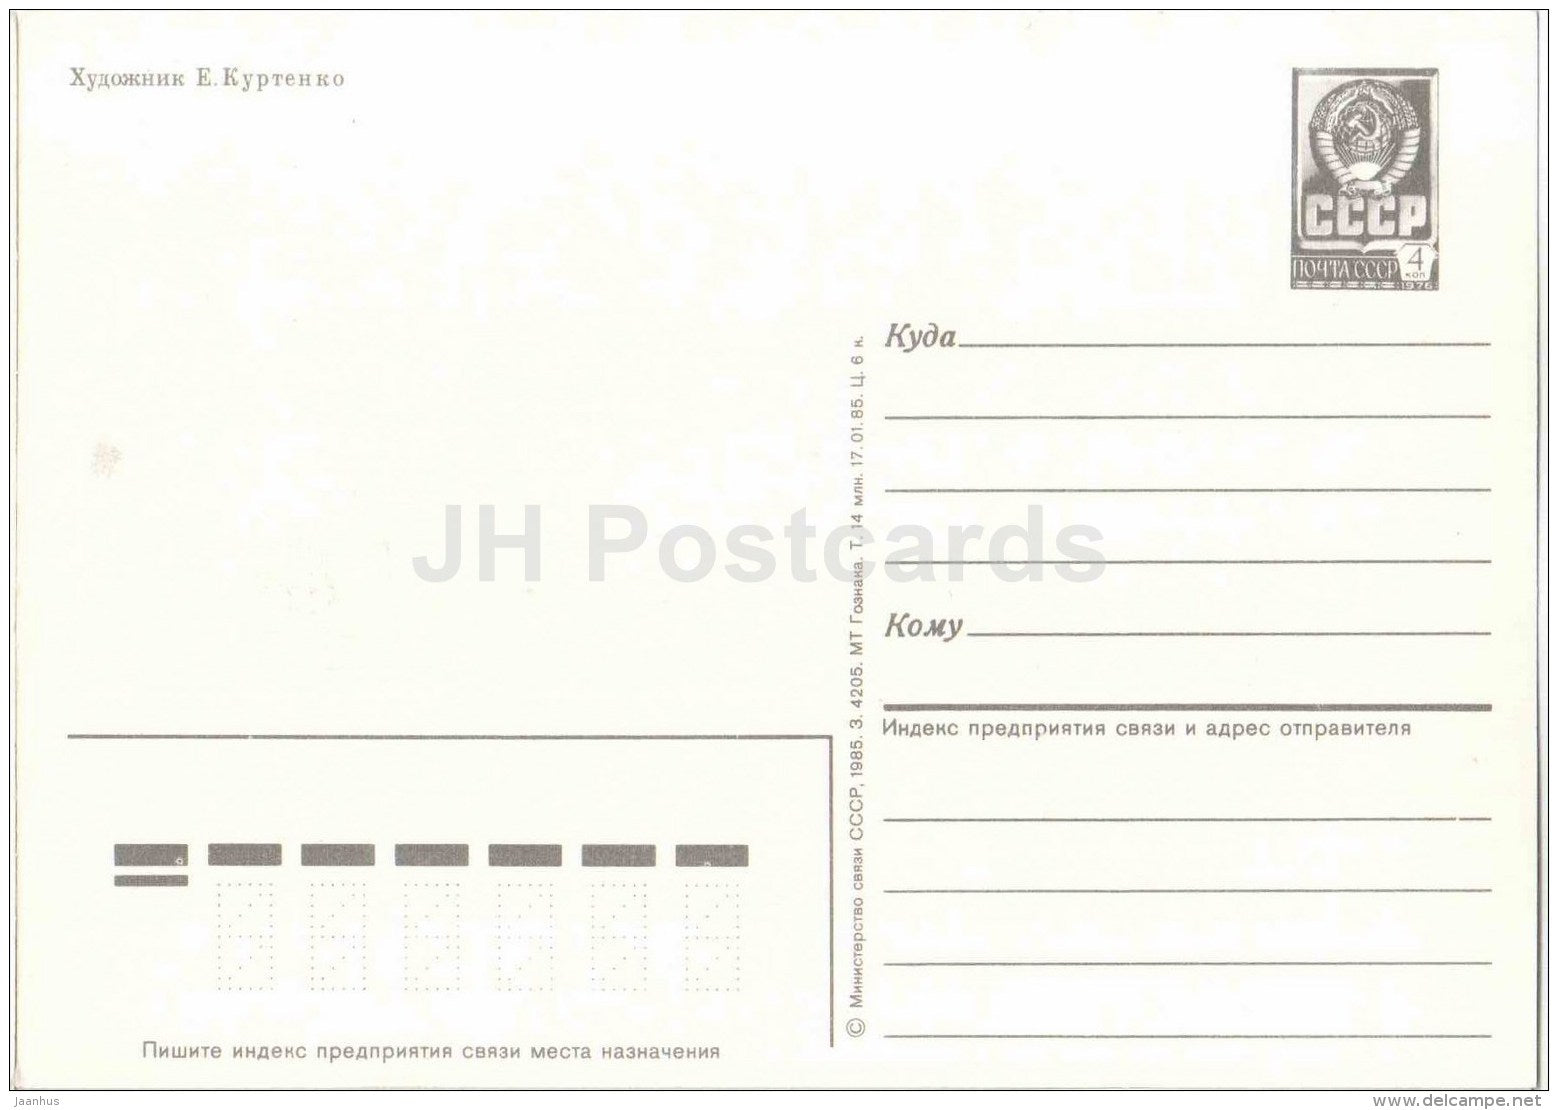 8 March International Women's Day greeting card - narcissus - daffodil - postal stationery - 1985 - Russia USSR - unused - JH Postcards